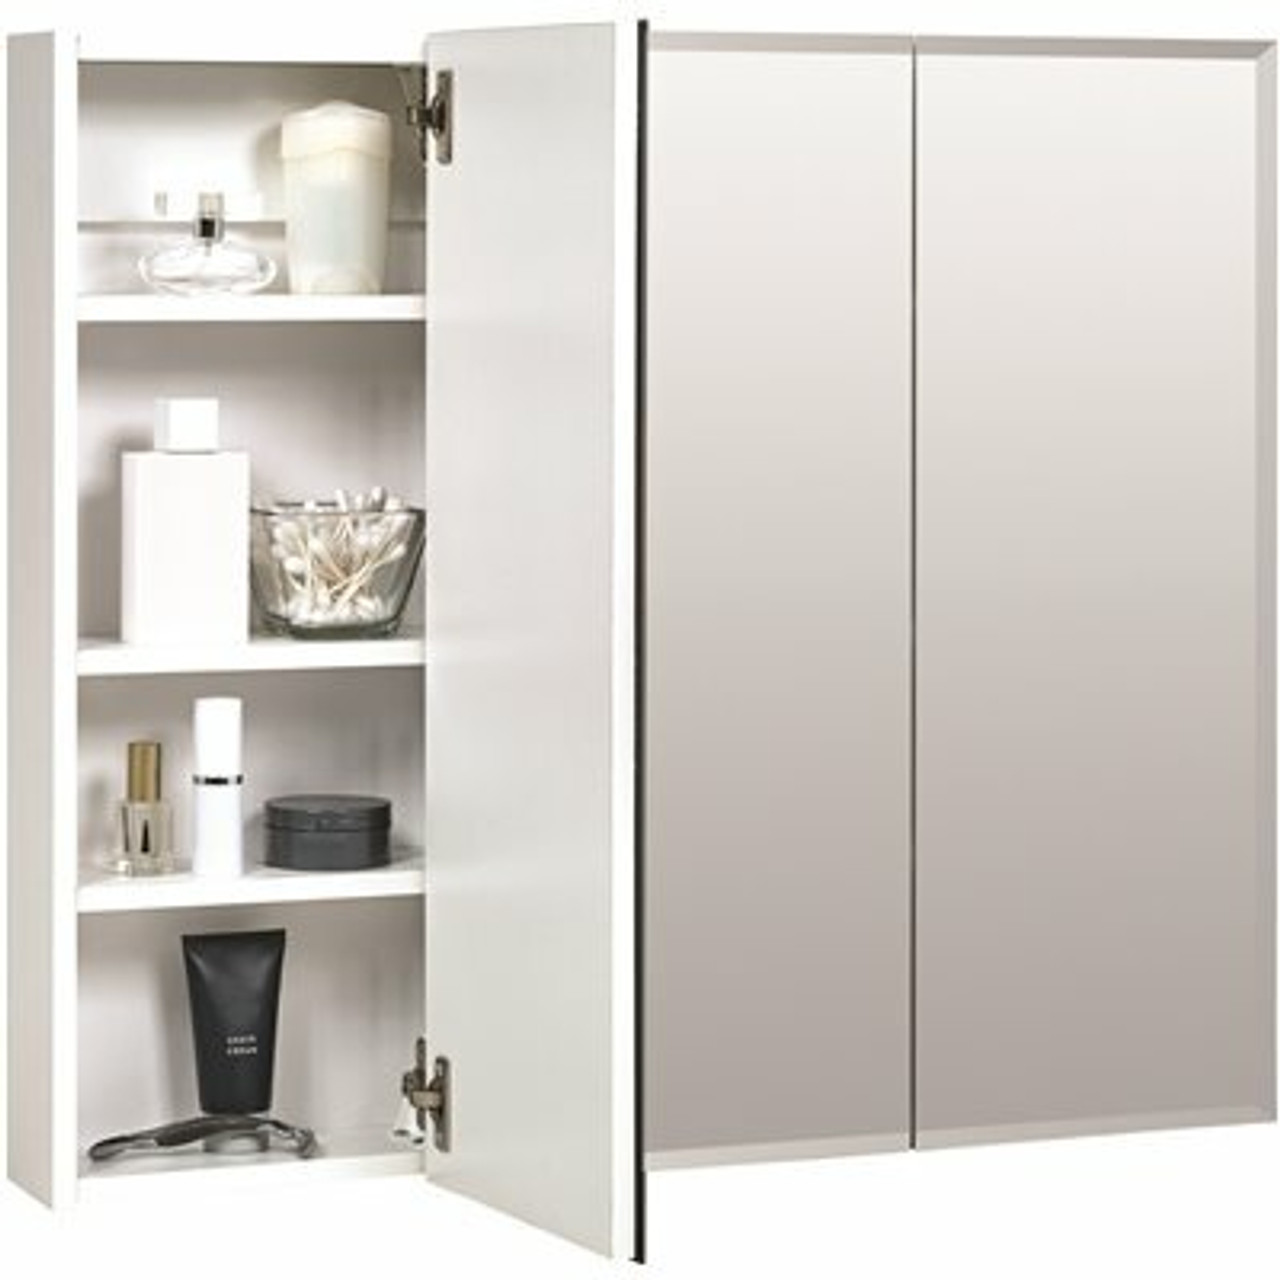 Zenna Home 30 In. W X 25 In. H X 4 In. D Surface-Mount Tri-View Mirrored Medicine Cabinet